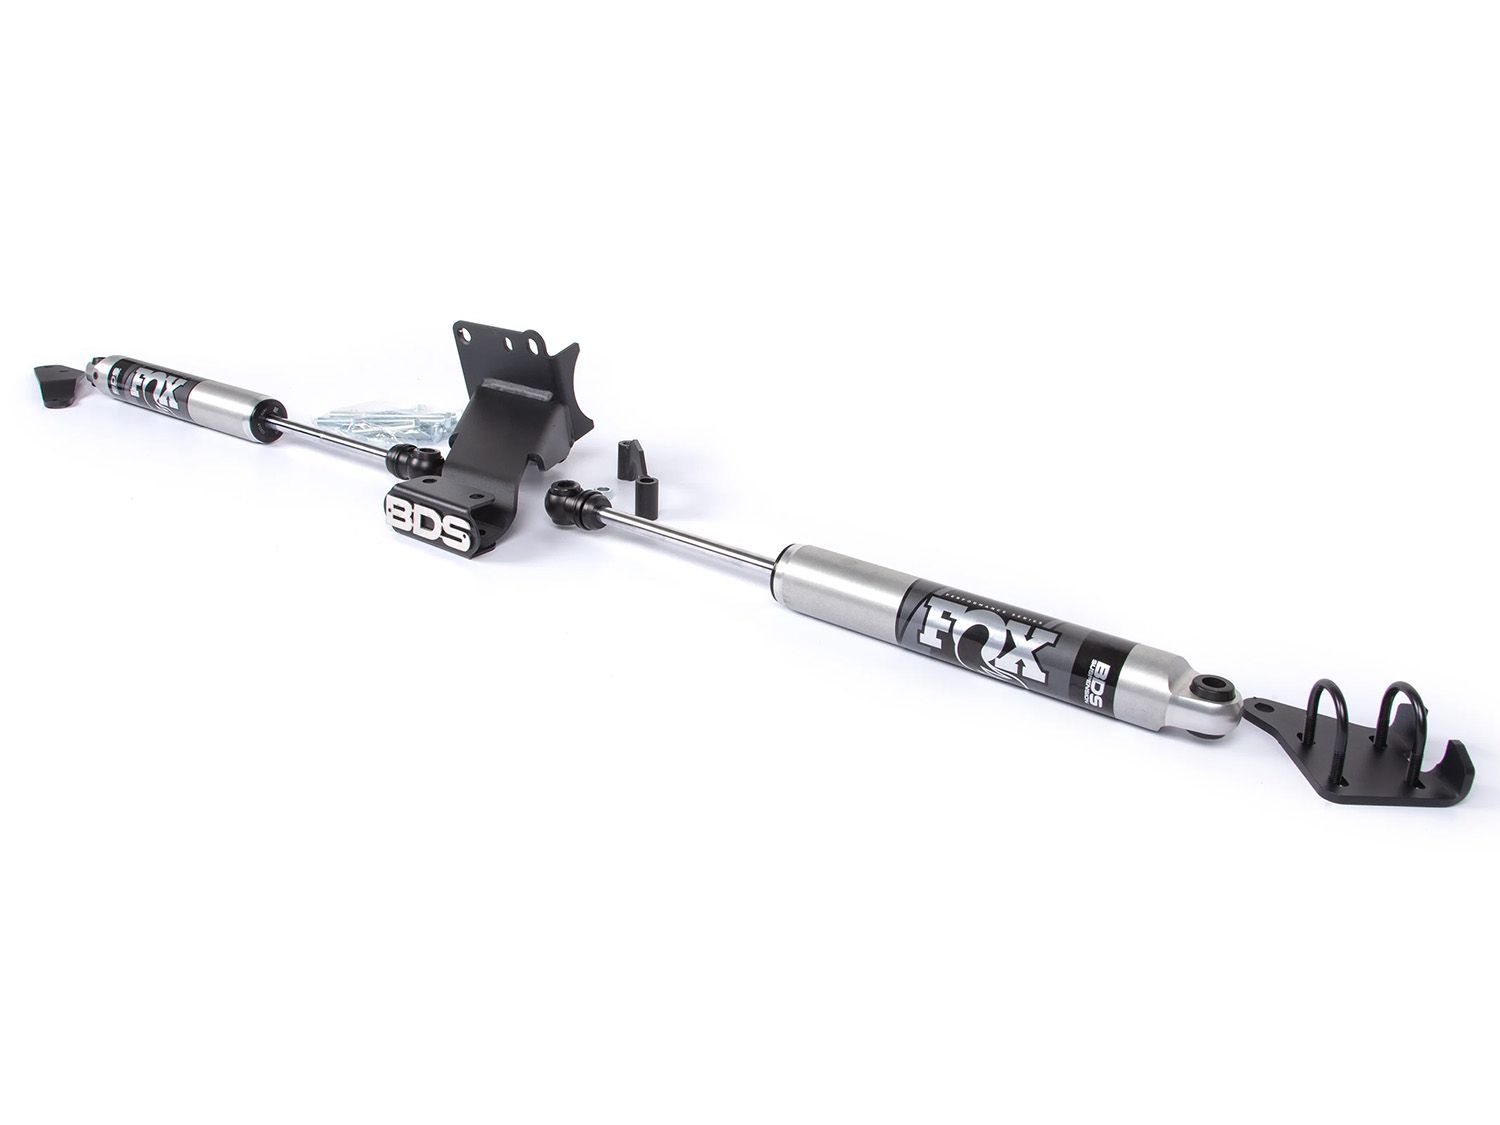 Ram 2500 2014-2018 Dodge 4WD - Fox Dual Steering Stabilizer by BDS